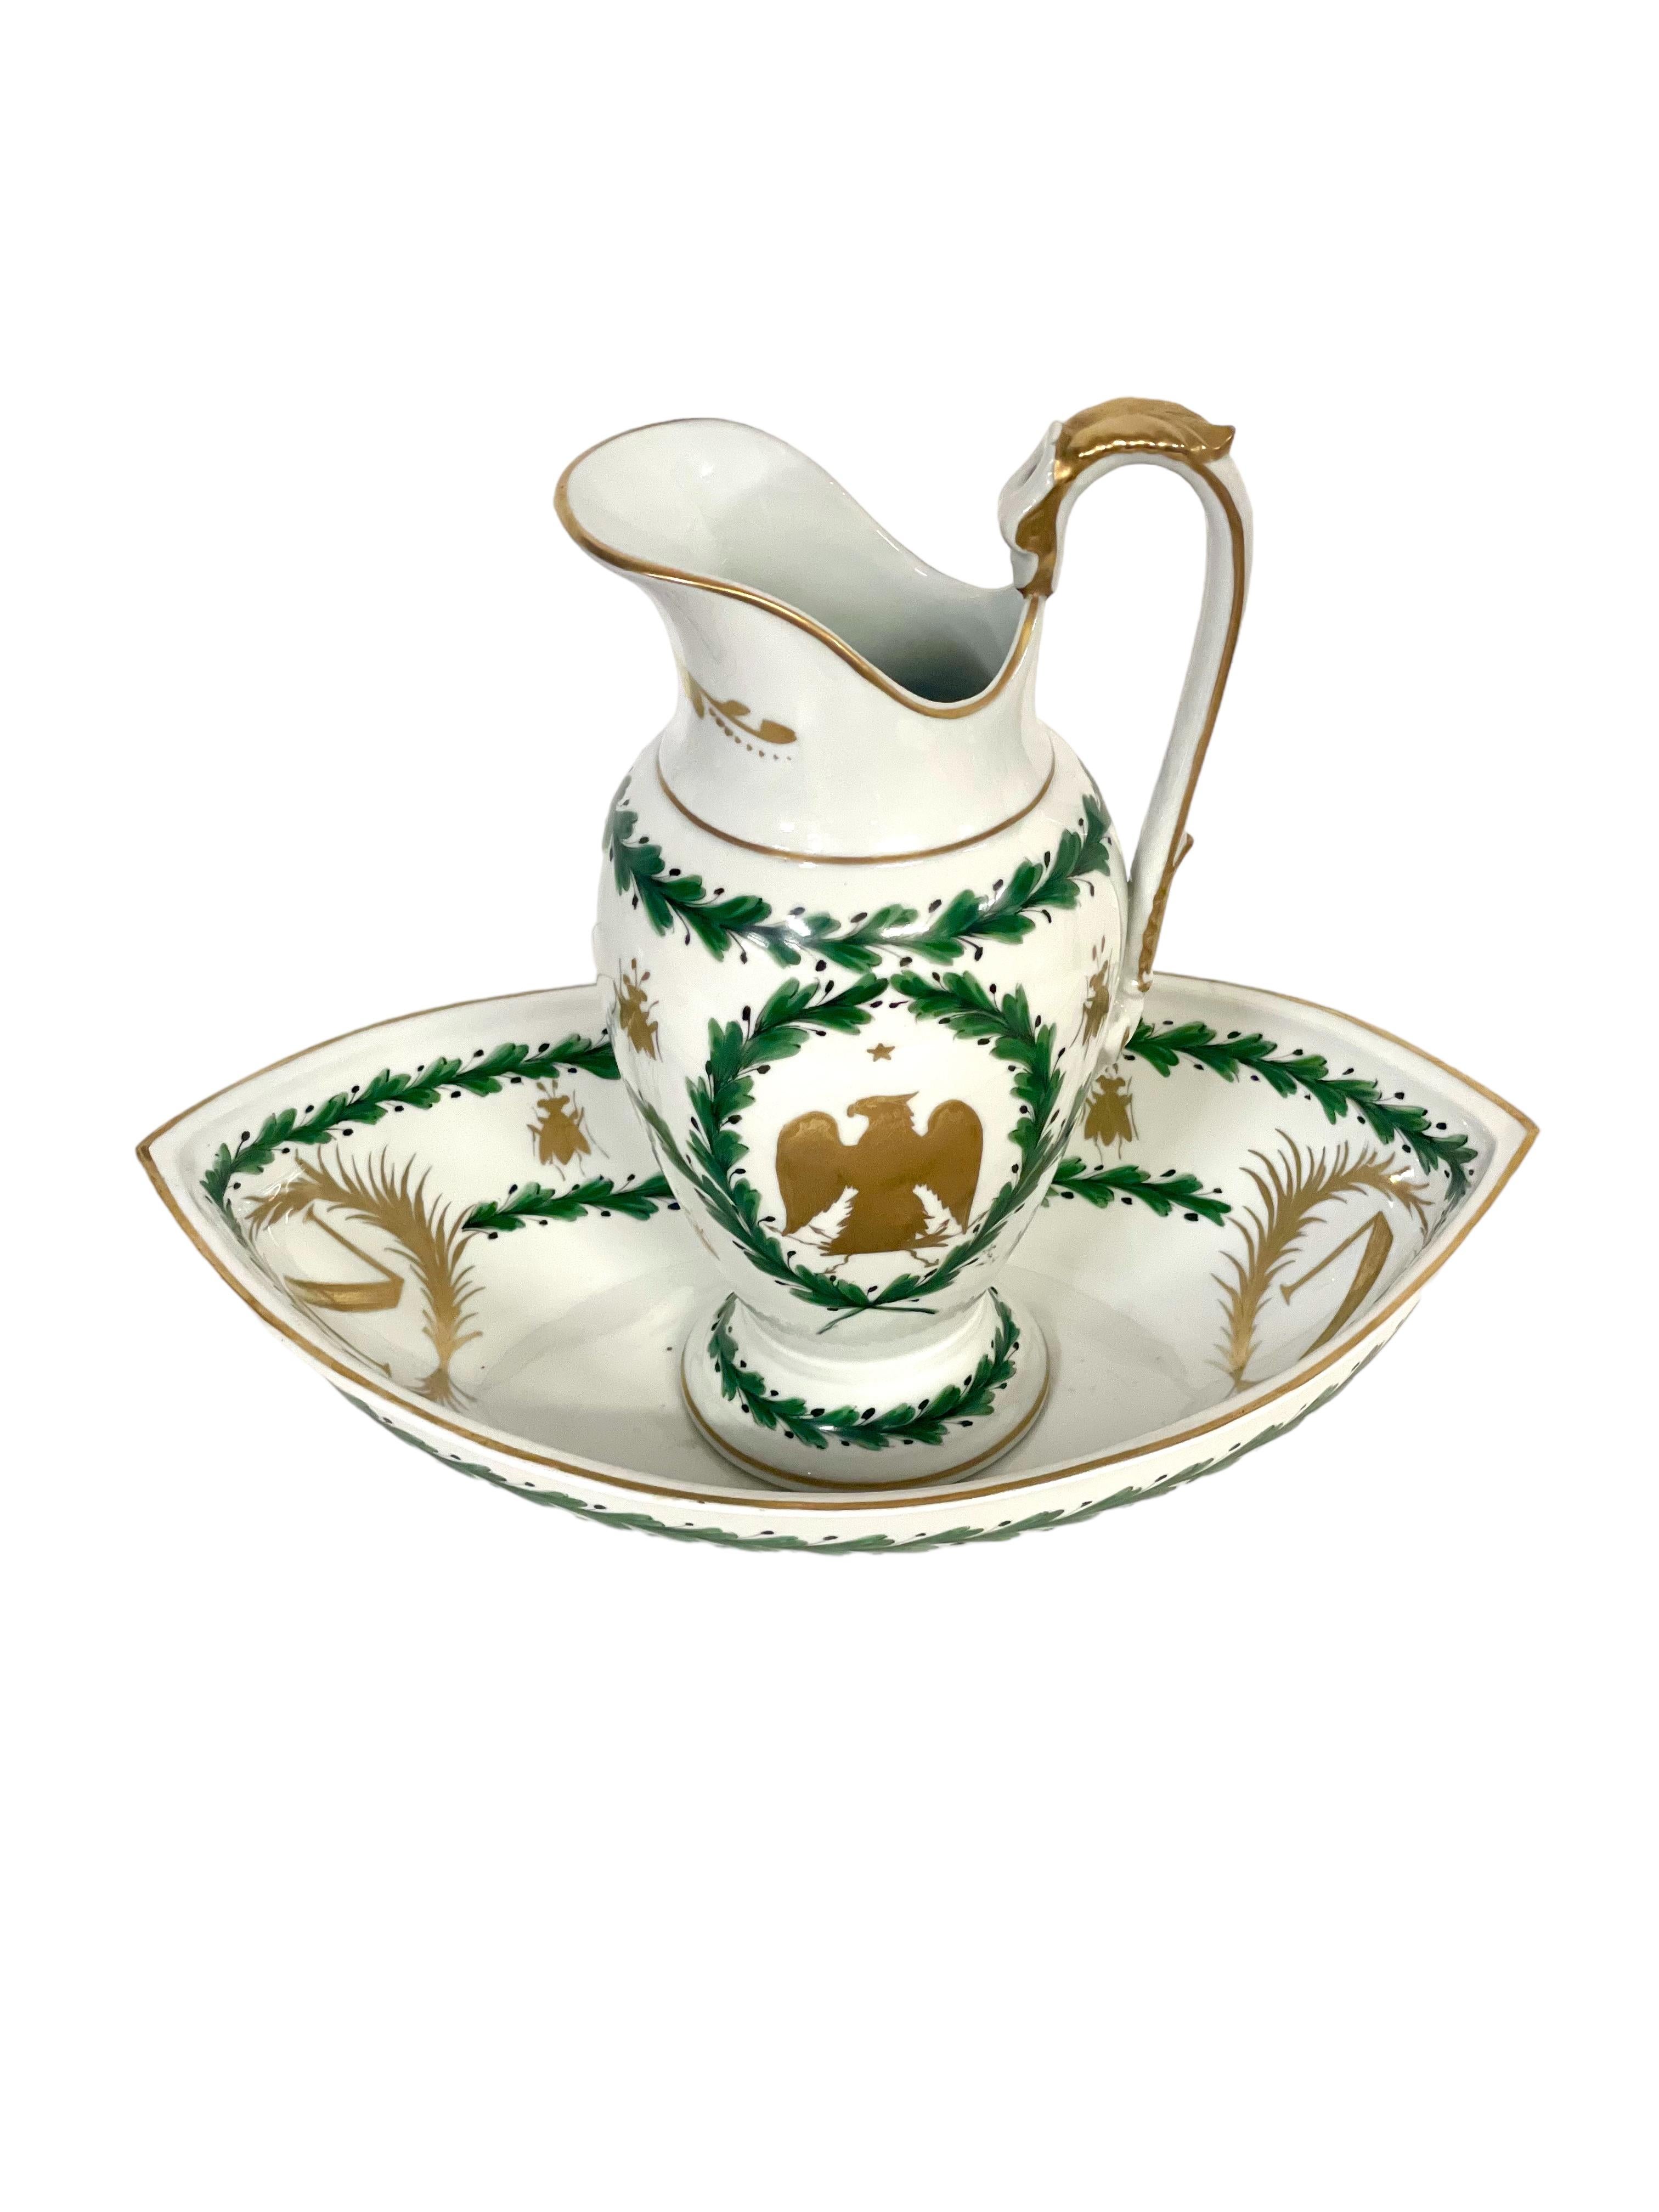 French Empire Period Paris Porcelain Basin and Pitcher with Napoleonic Emblems For Sale 11